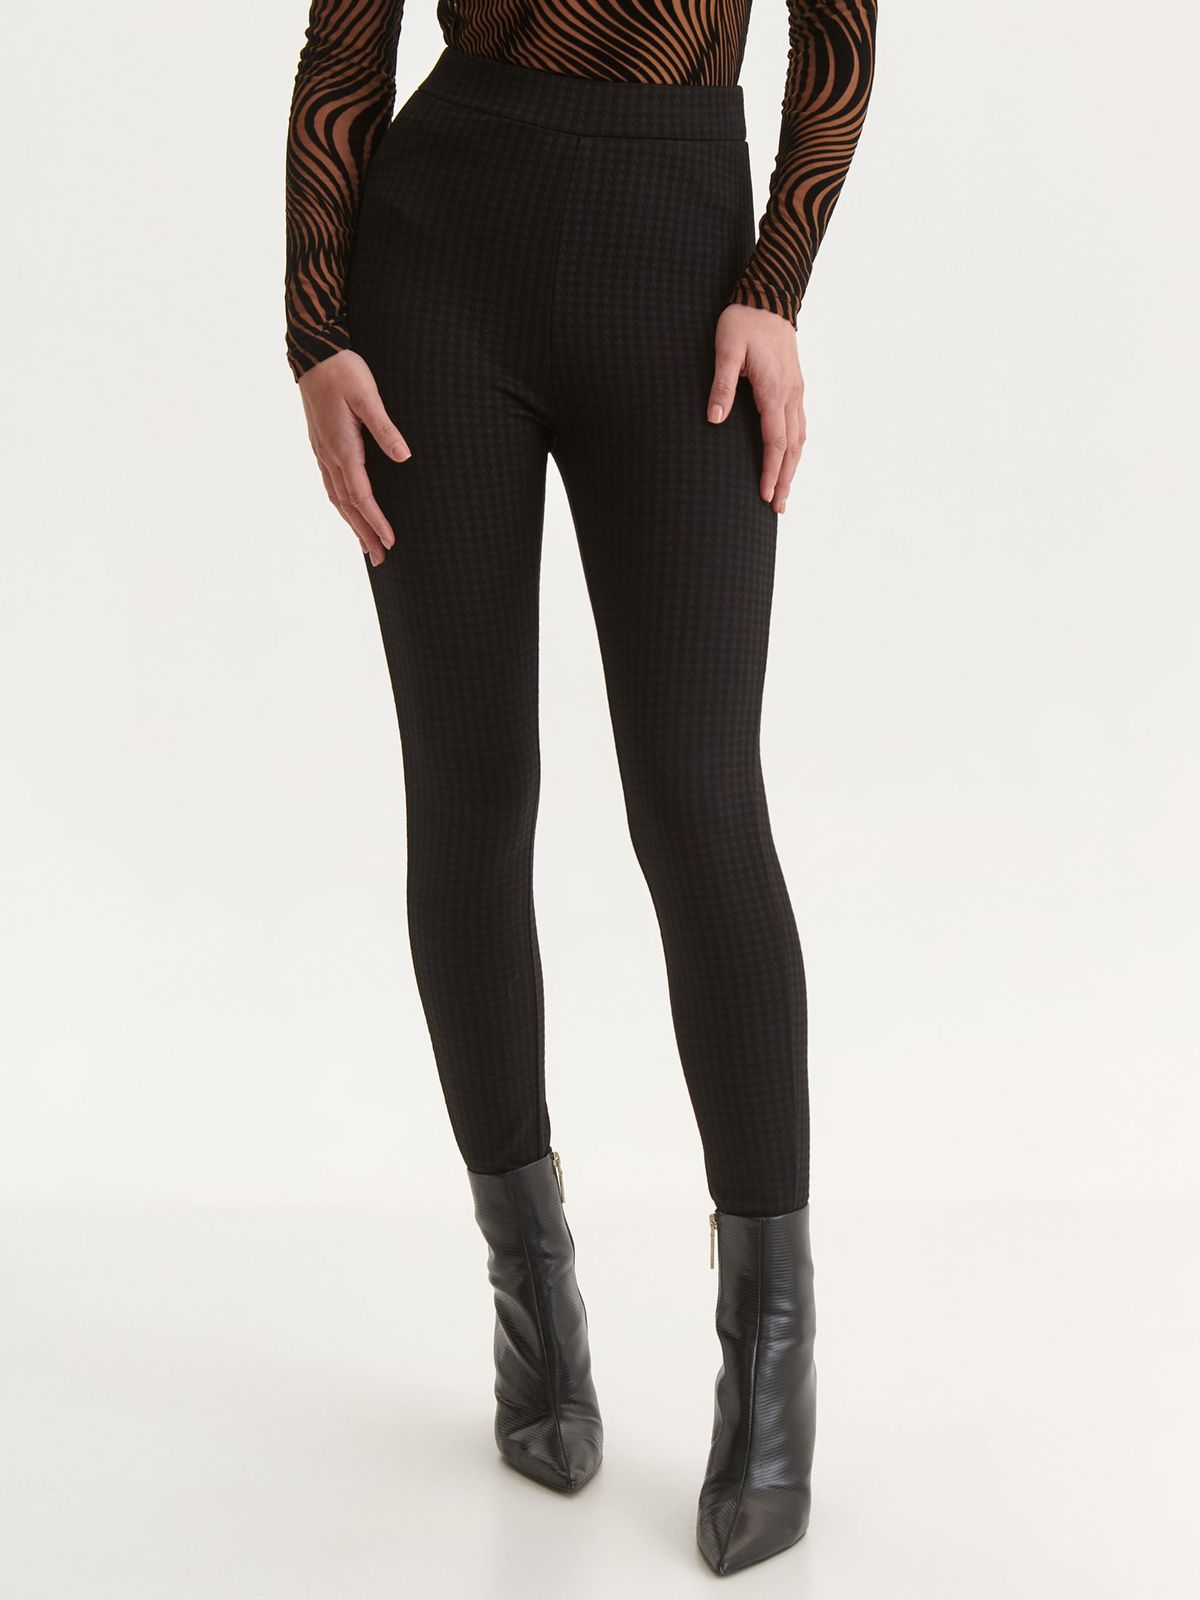 Black tights knitted high waisted with chequers